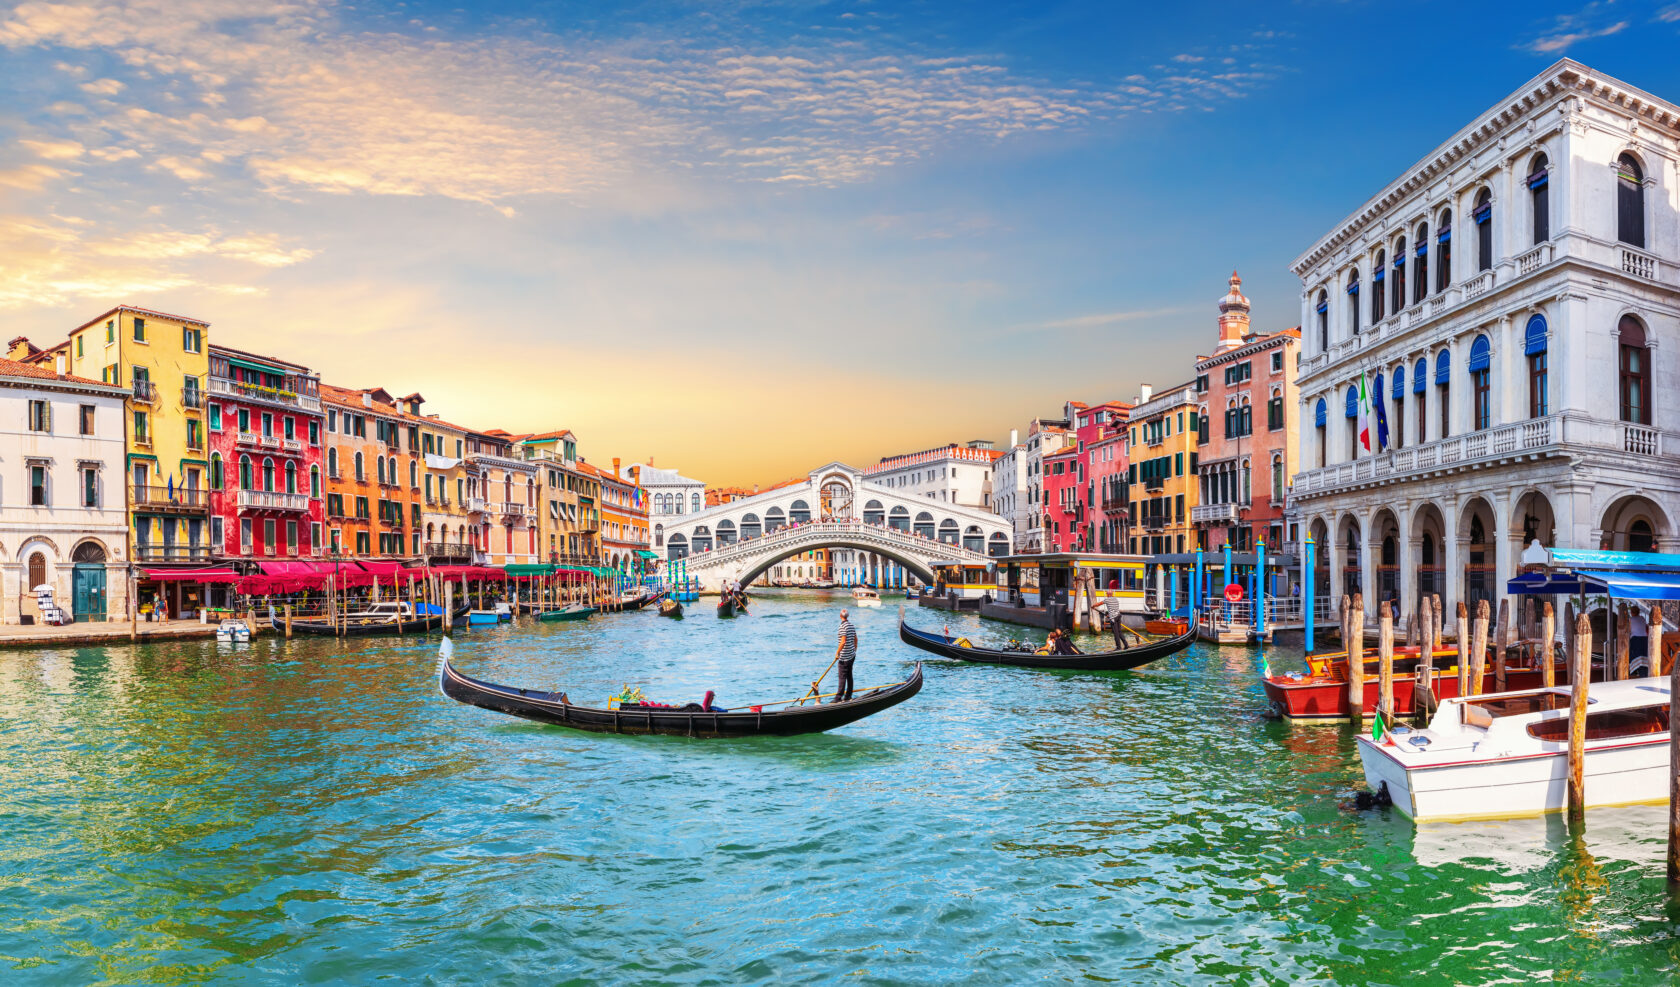 A view of Venice Grand Canal and the Rialto Bridge in Venice, Italy (an Atlantis site).